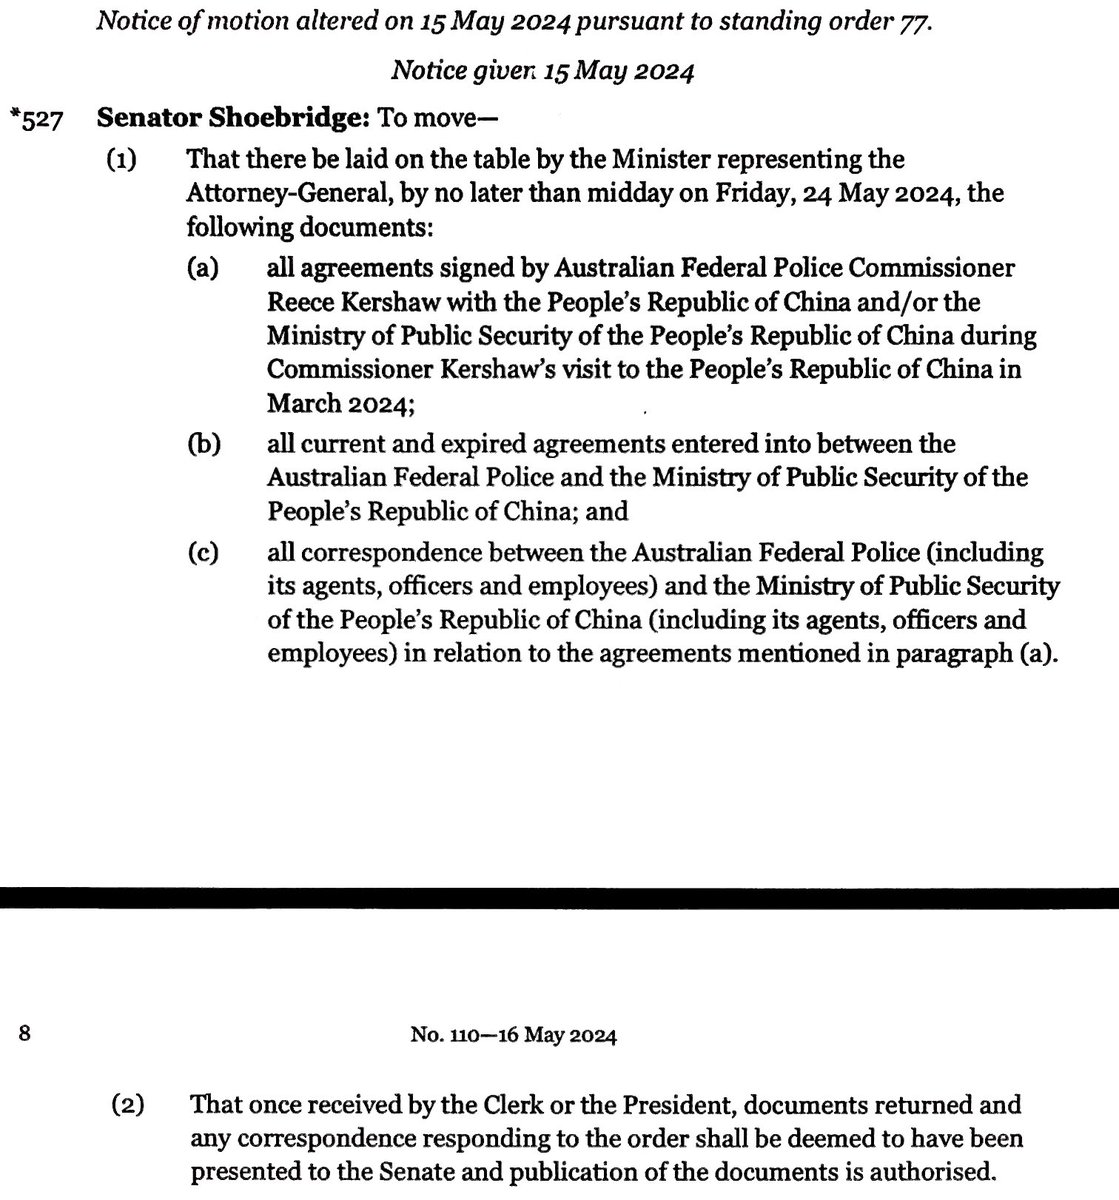 The AFP used secret agreements with China’s Ministry of Public Security to allow police from the PRC to secretly operate in Australia. It is outrageous.

We moved in the Senate to force the release of these secret agreements.

Labor and the Coalition voted together to deny it.